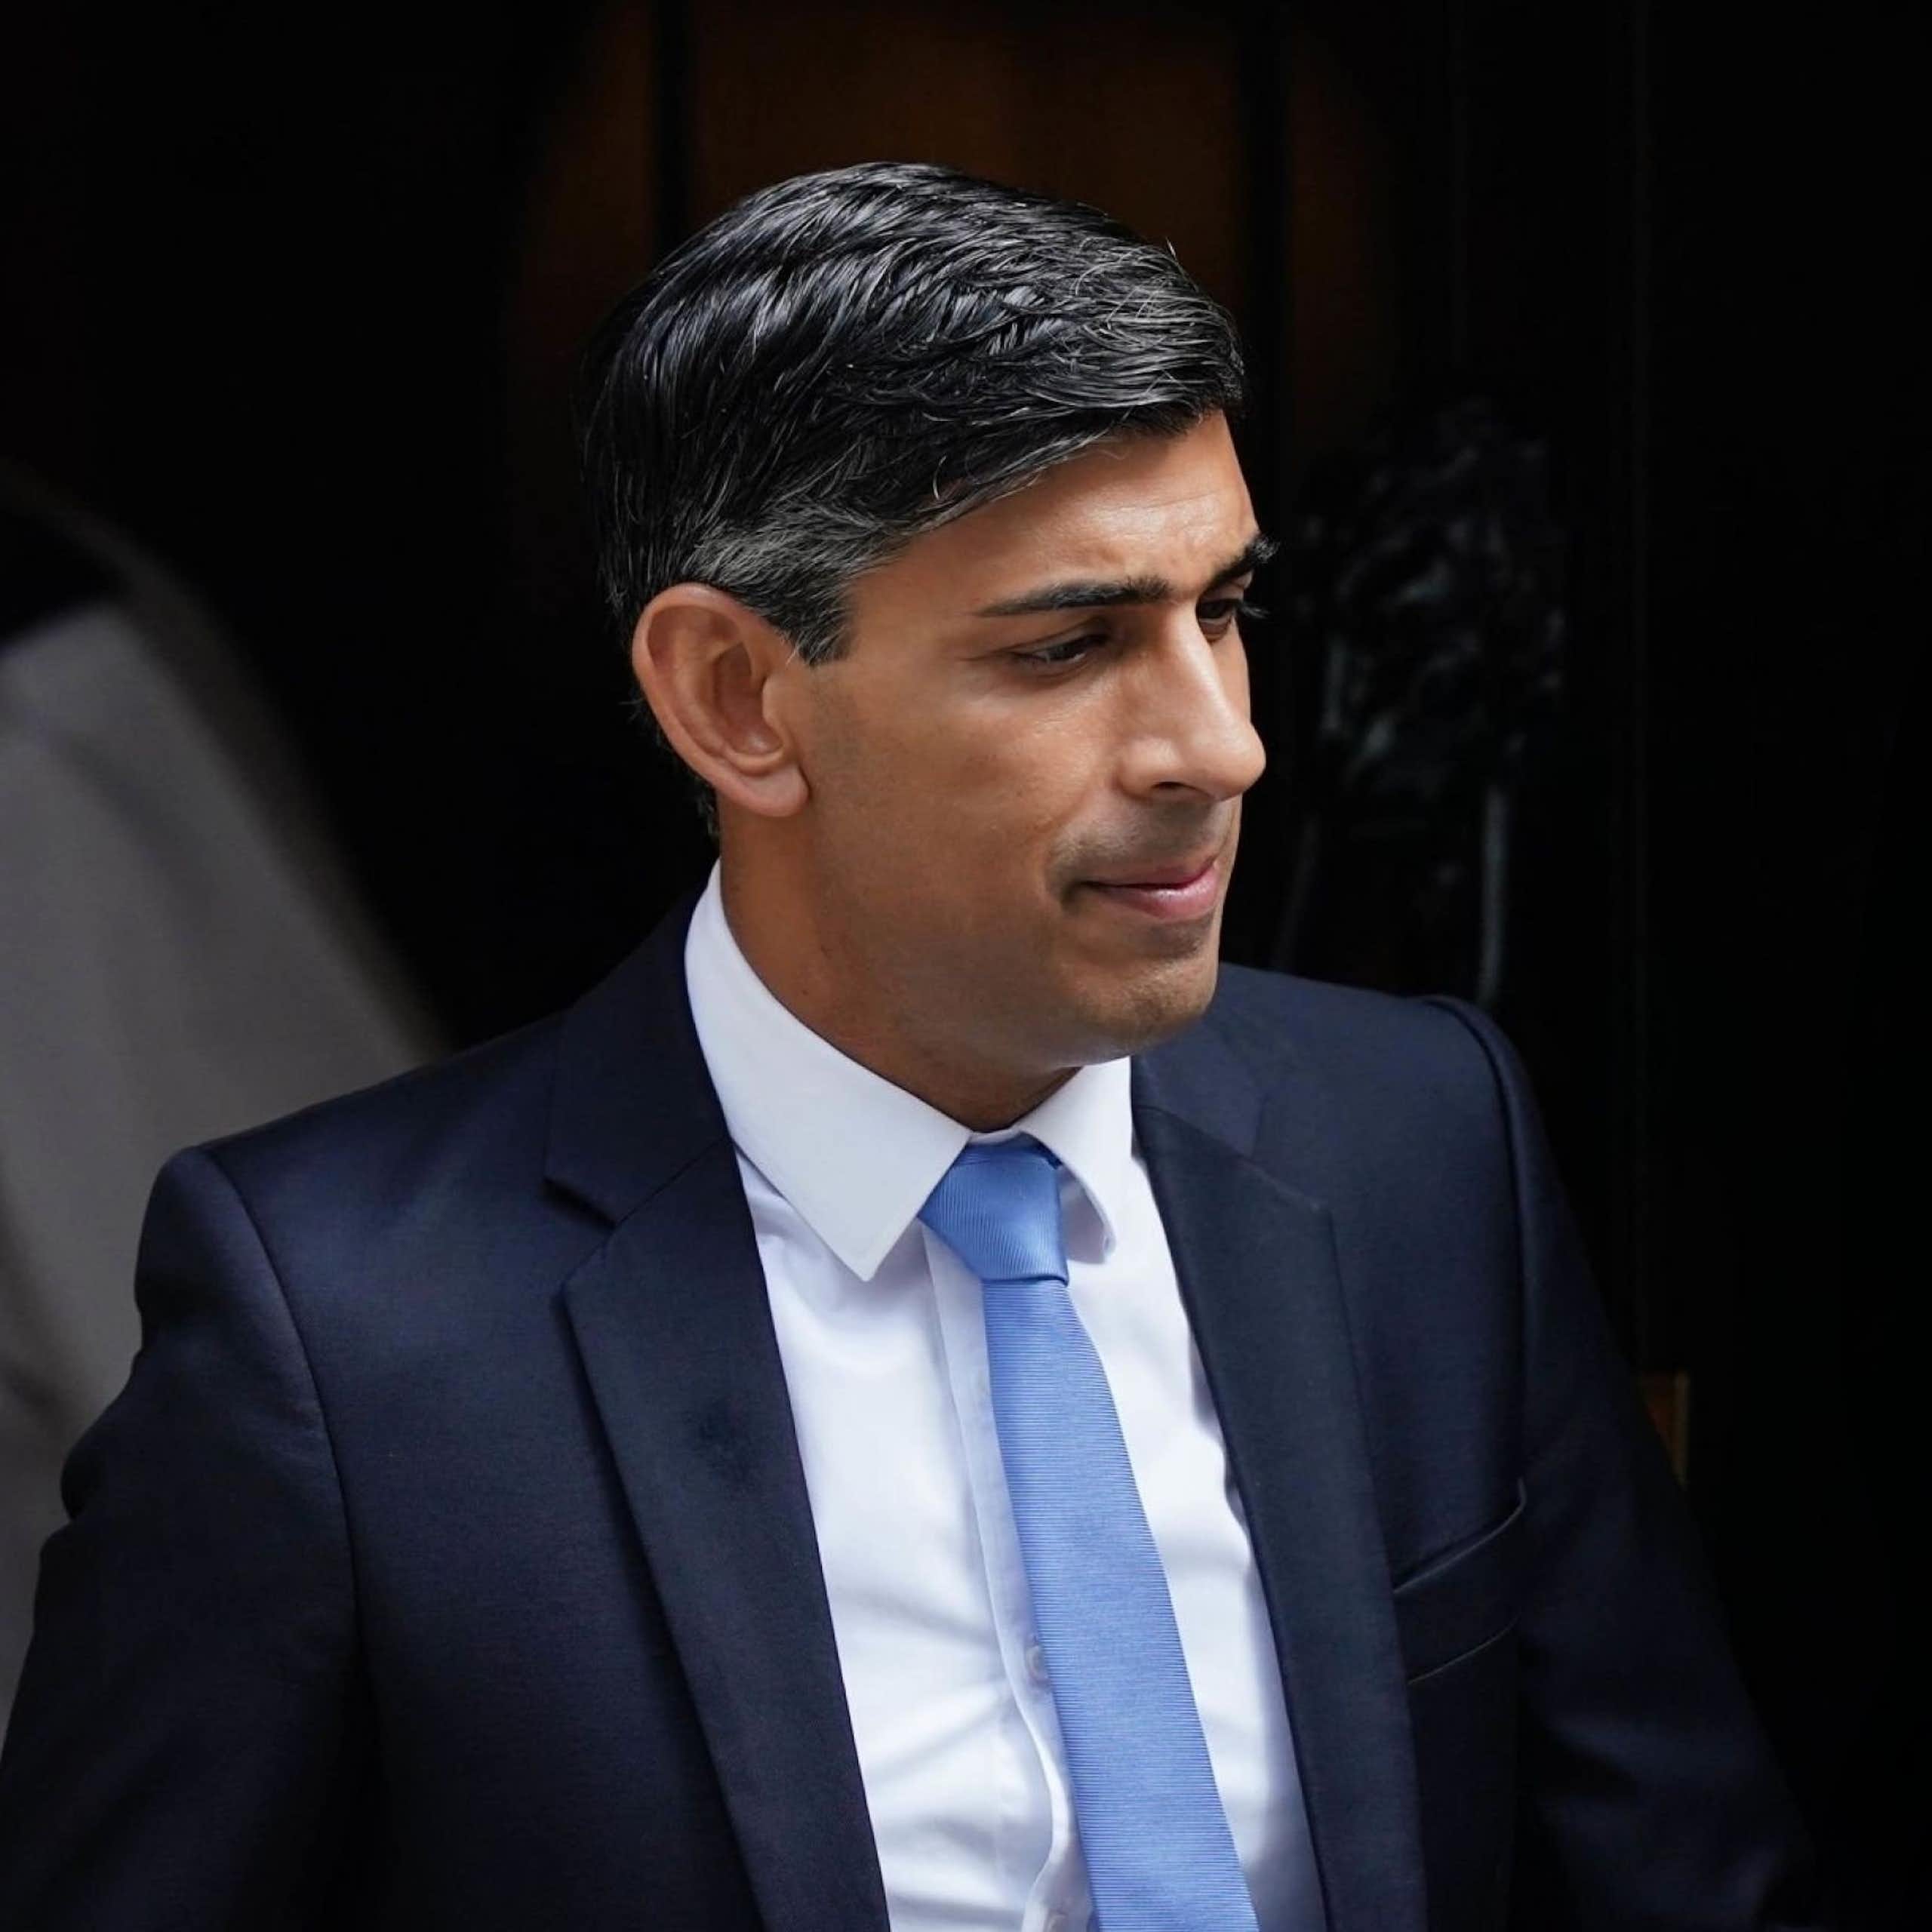 Rishi Sunak wants to cut the cost of ‘sicknote’ Britain. But we’ve found a strong economic case for benefits